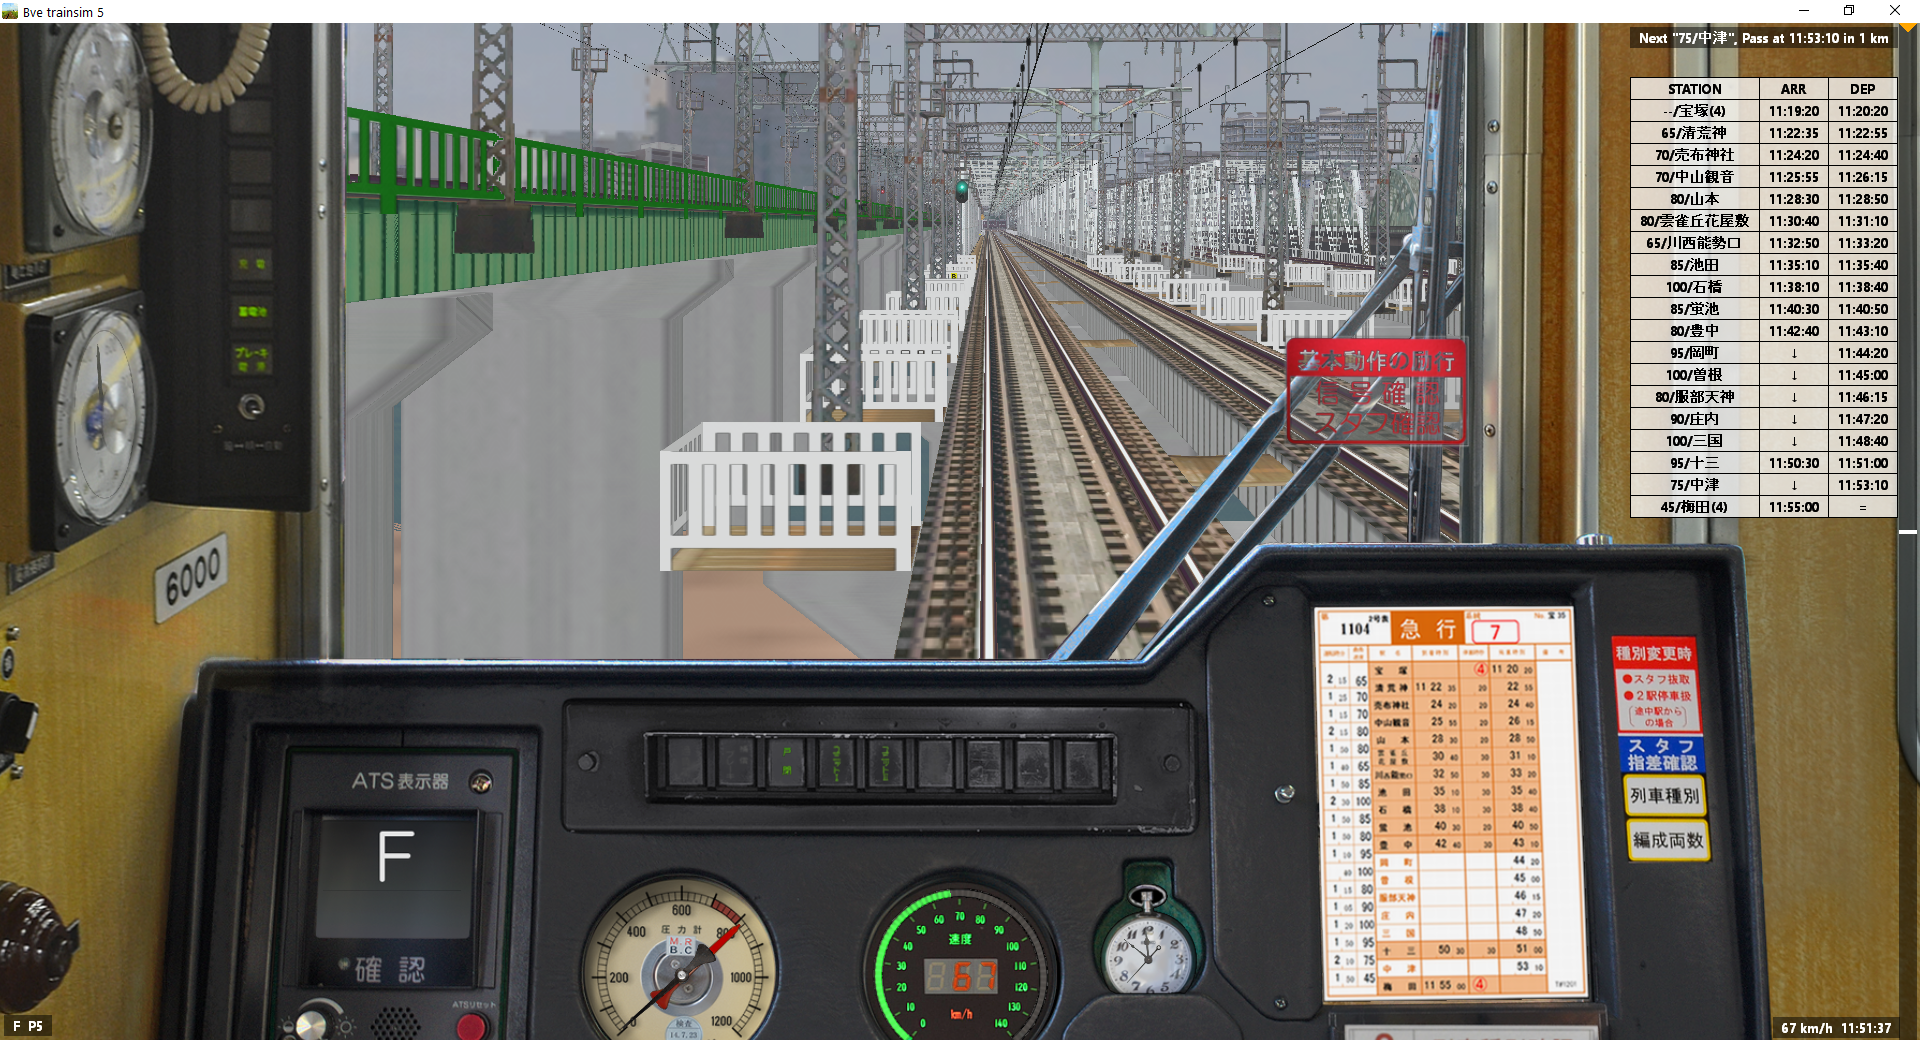 Bve Train Simulator 5 6 The Big English Guide On How To Use It And Why Hit To Key